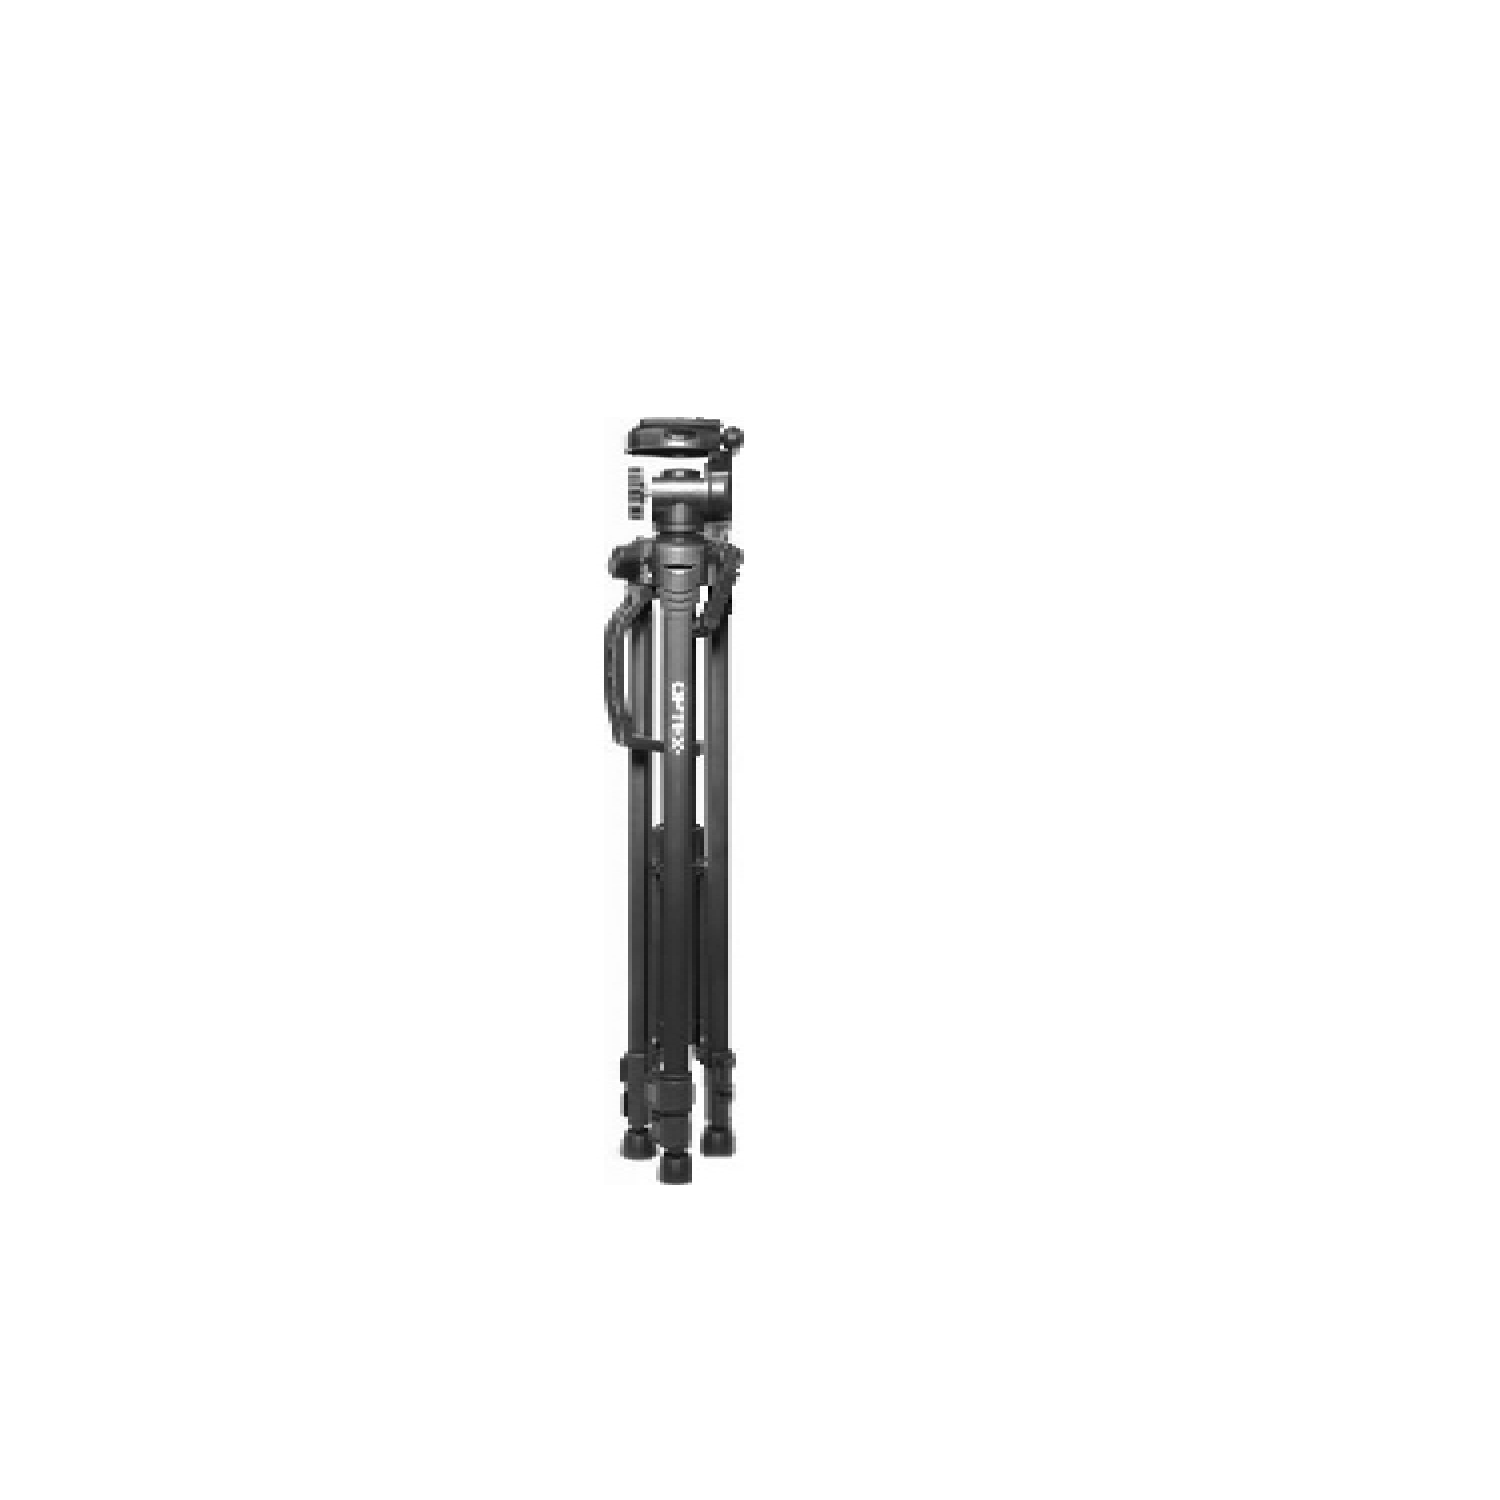 Optex OPT357 Video Tripod with 3-Way Head